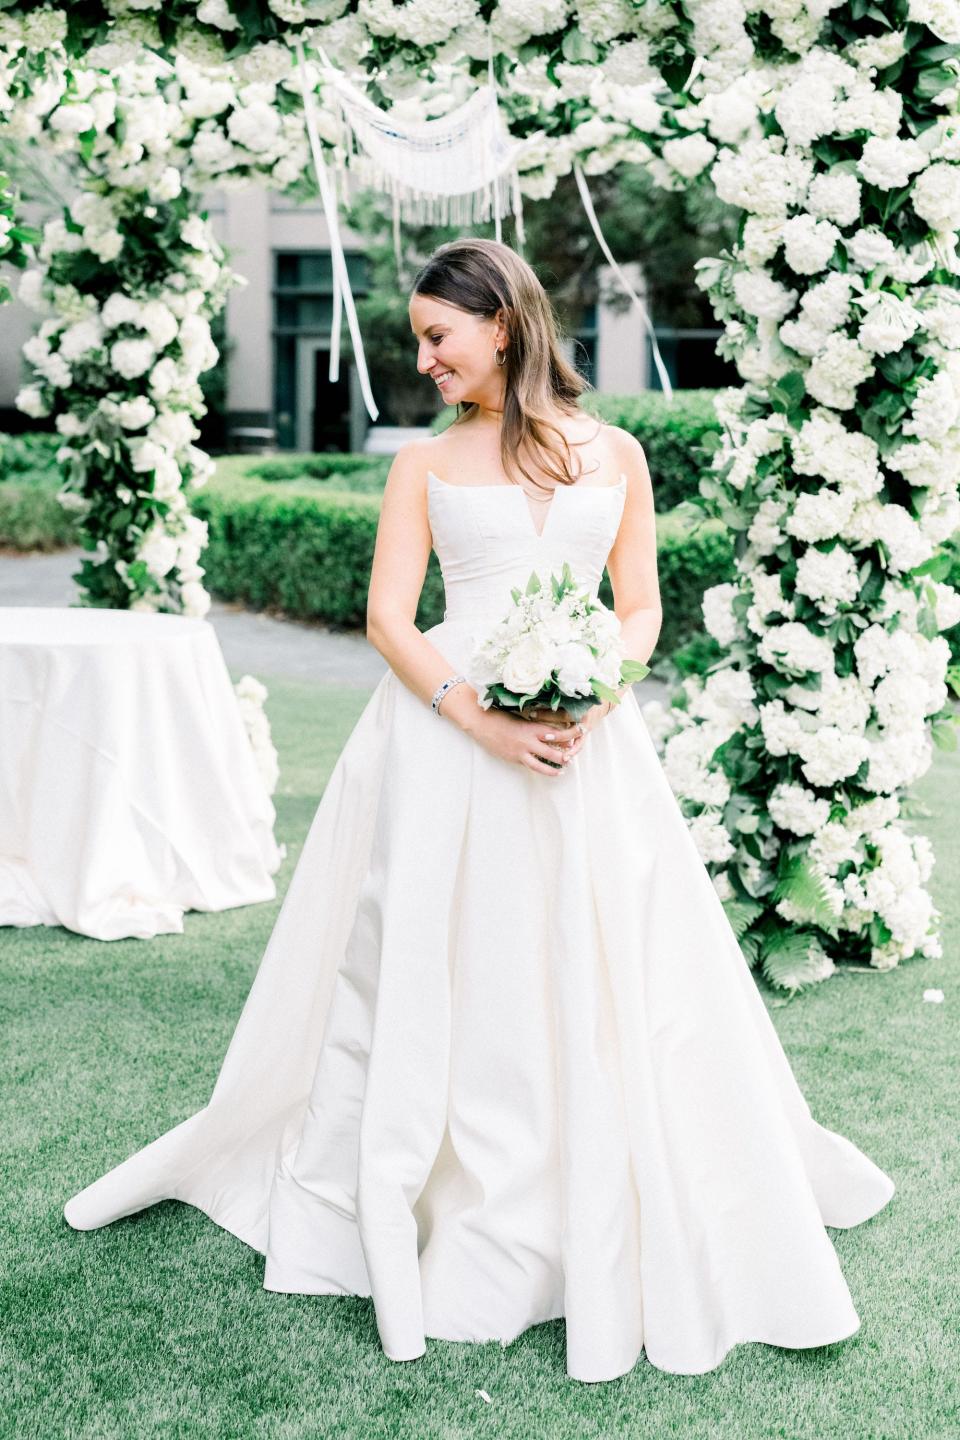 A bride holds a bouquet in front of an oversized floral archway.